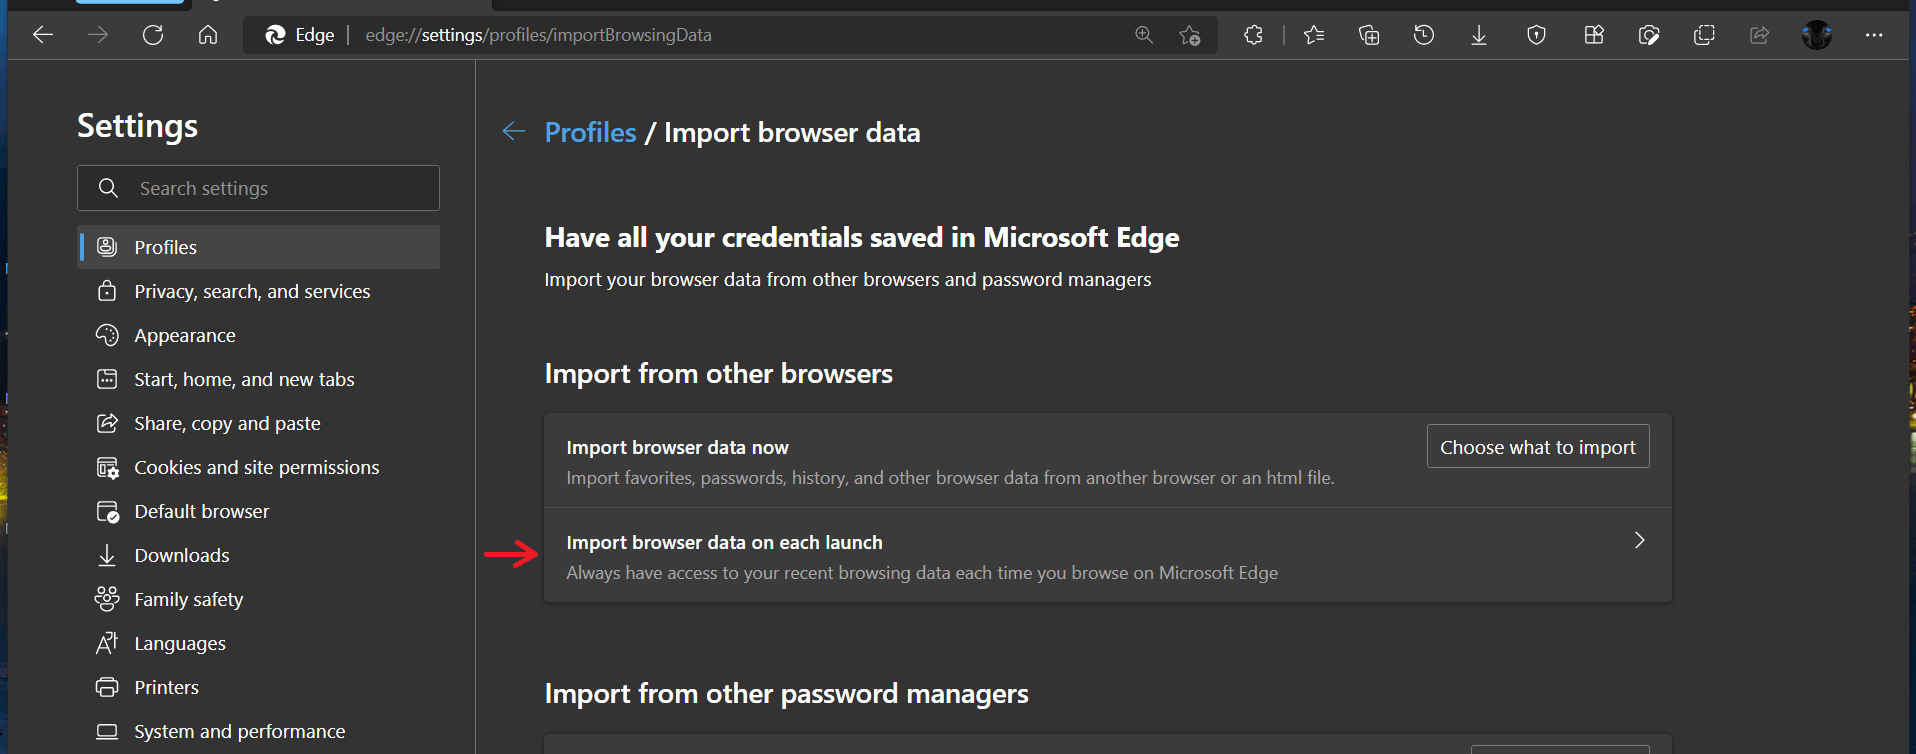 Edge Import Data From Other Browsers On Launch